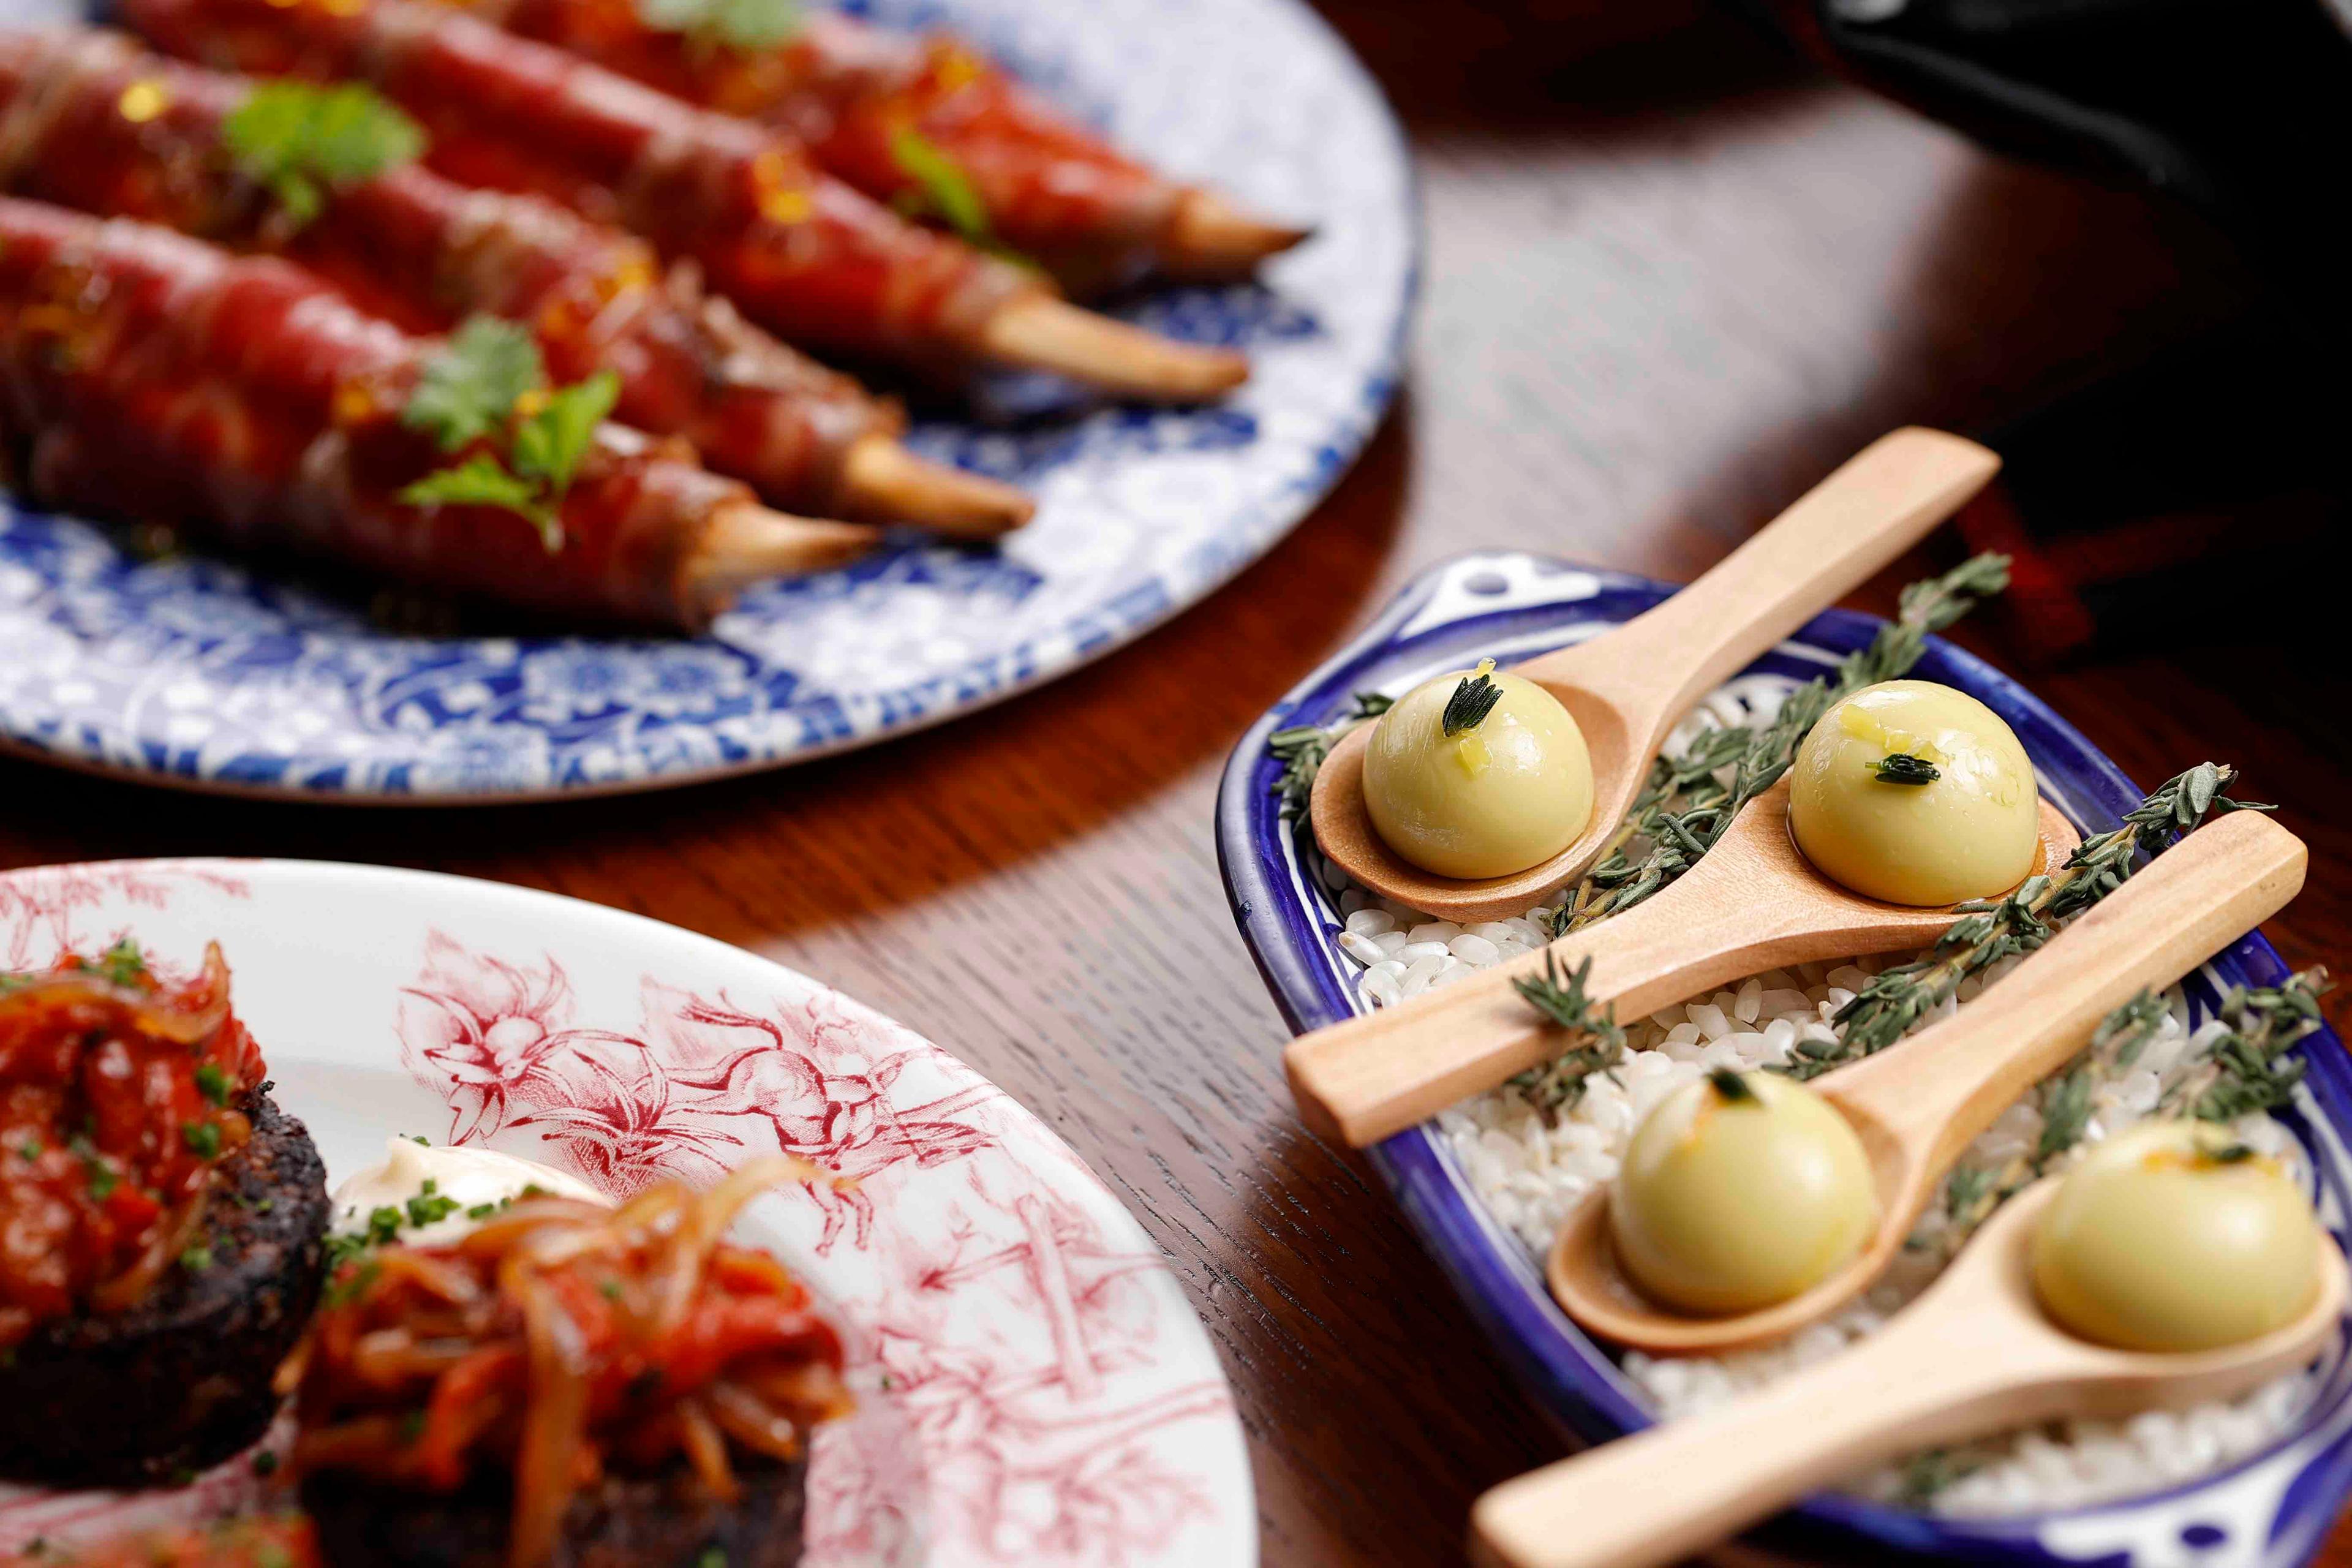 SPANISH RESTAURANT IN DUBAI LAUNCHES A FRESH NEW MENU INSPIRED BY BEST SELLING TABERNA CLASSICS